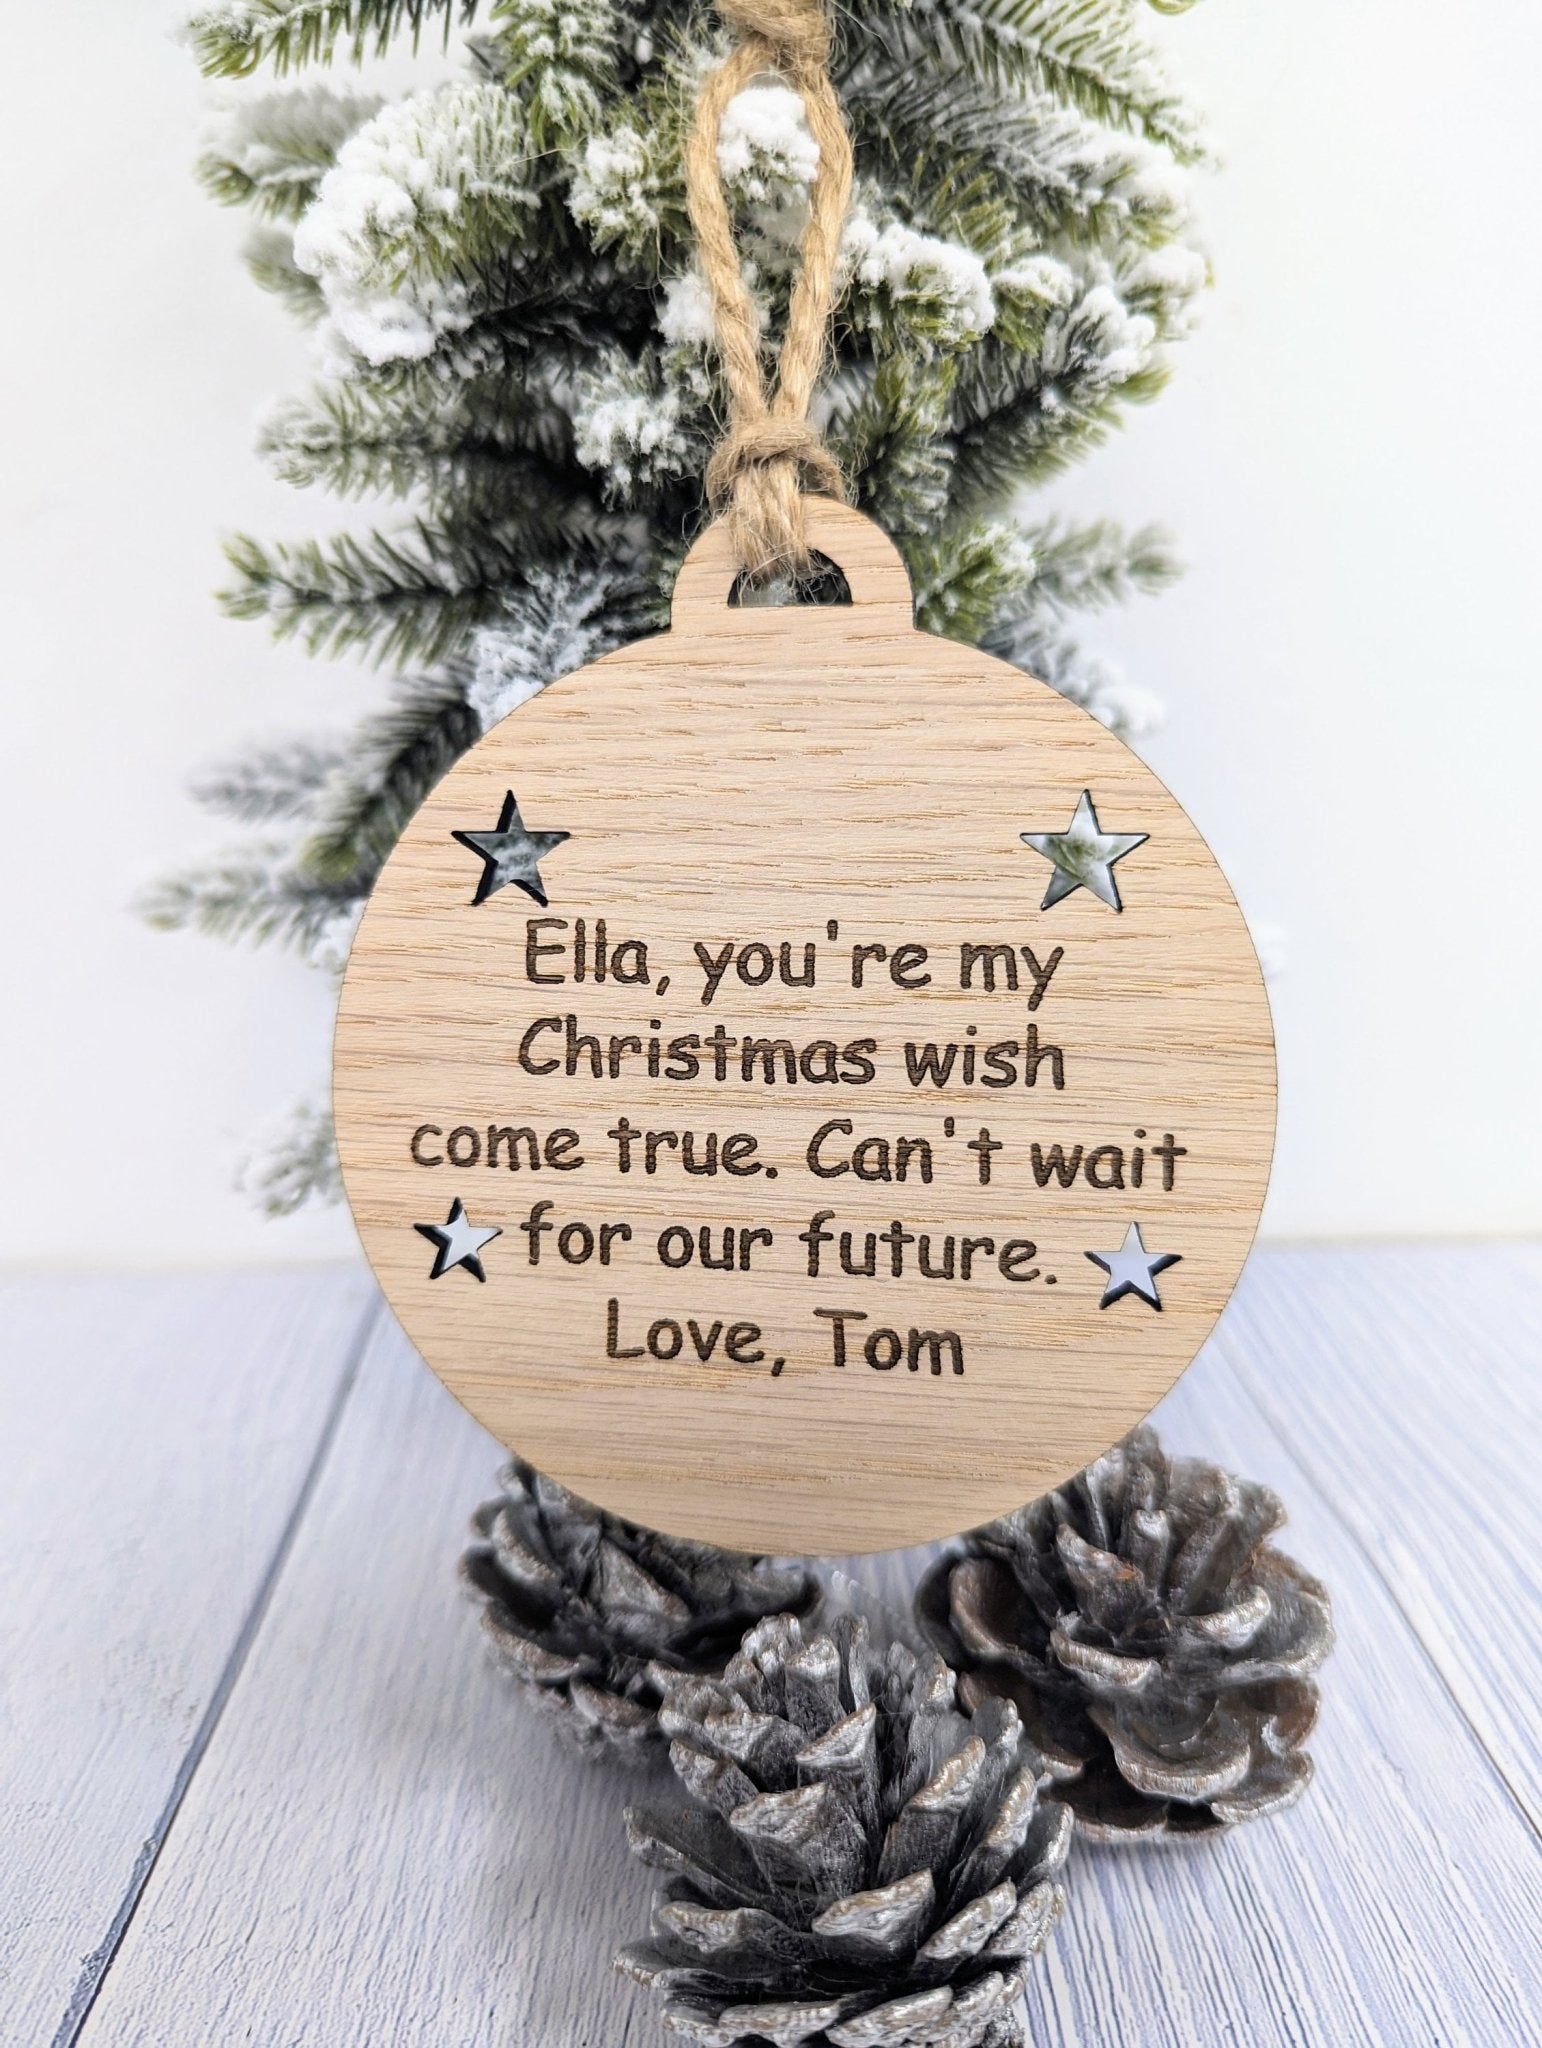 Personalised 'Message in a Bauble' Christmas Ornament - Heart or Star Cut-Outs - Oak Veneer - Rustic Jute String - CherryGroveCraft